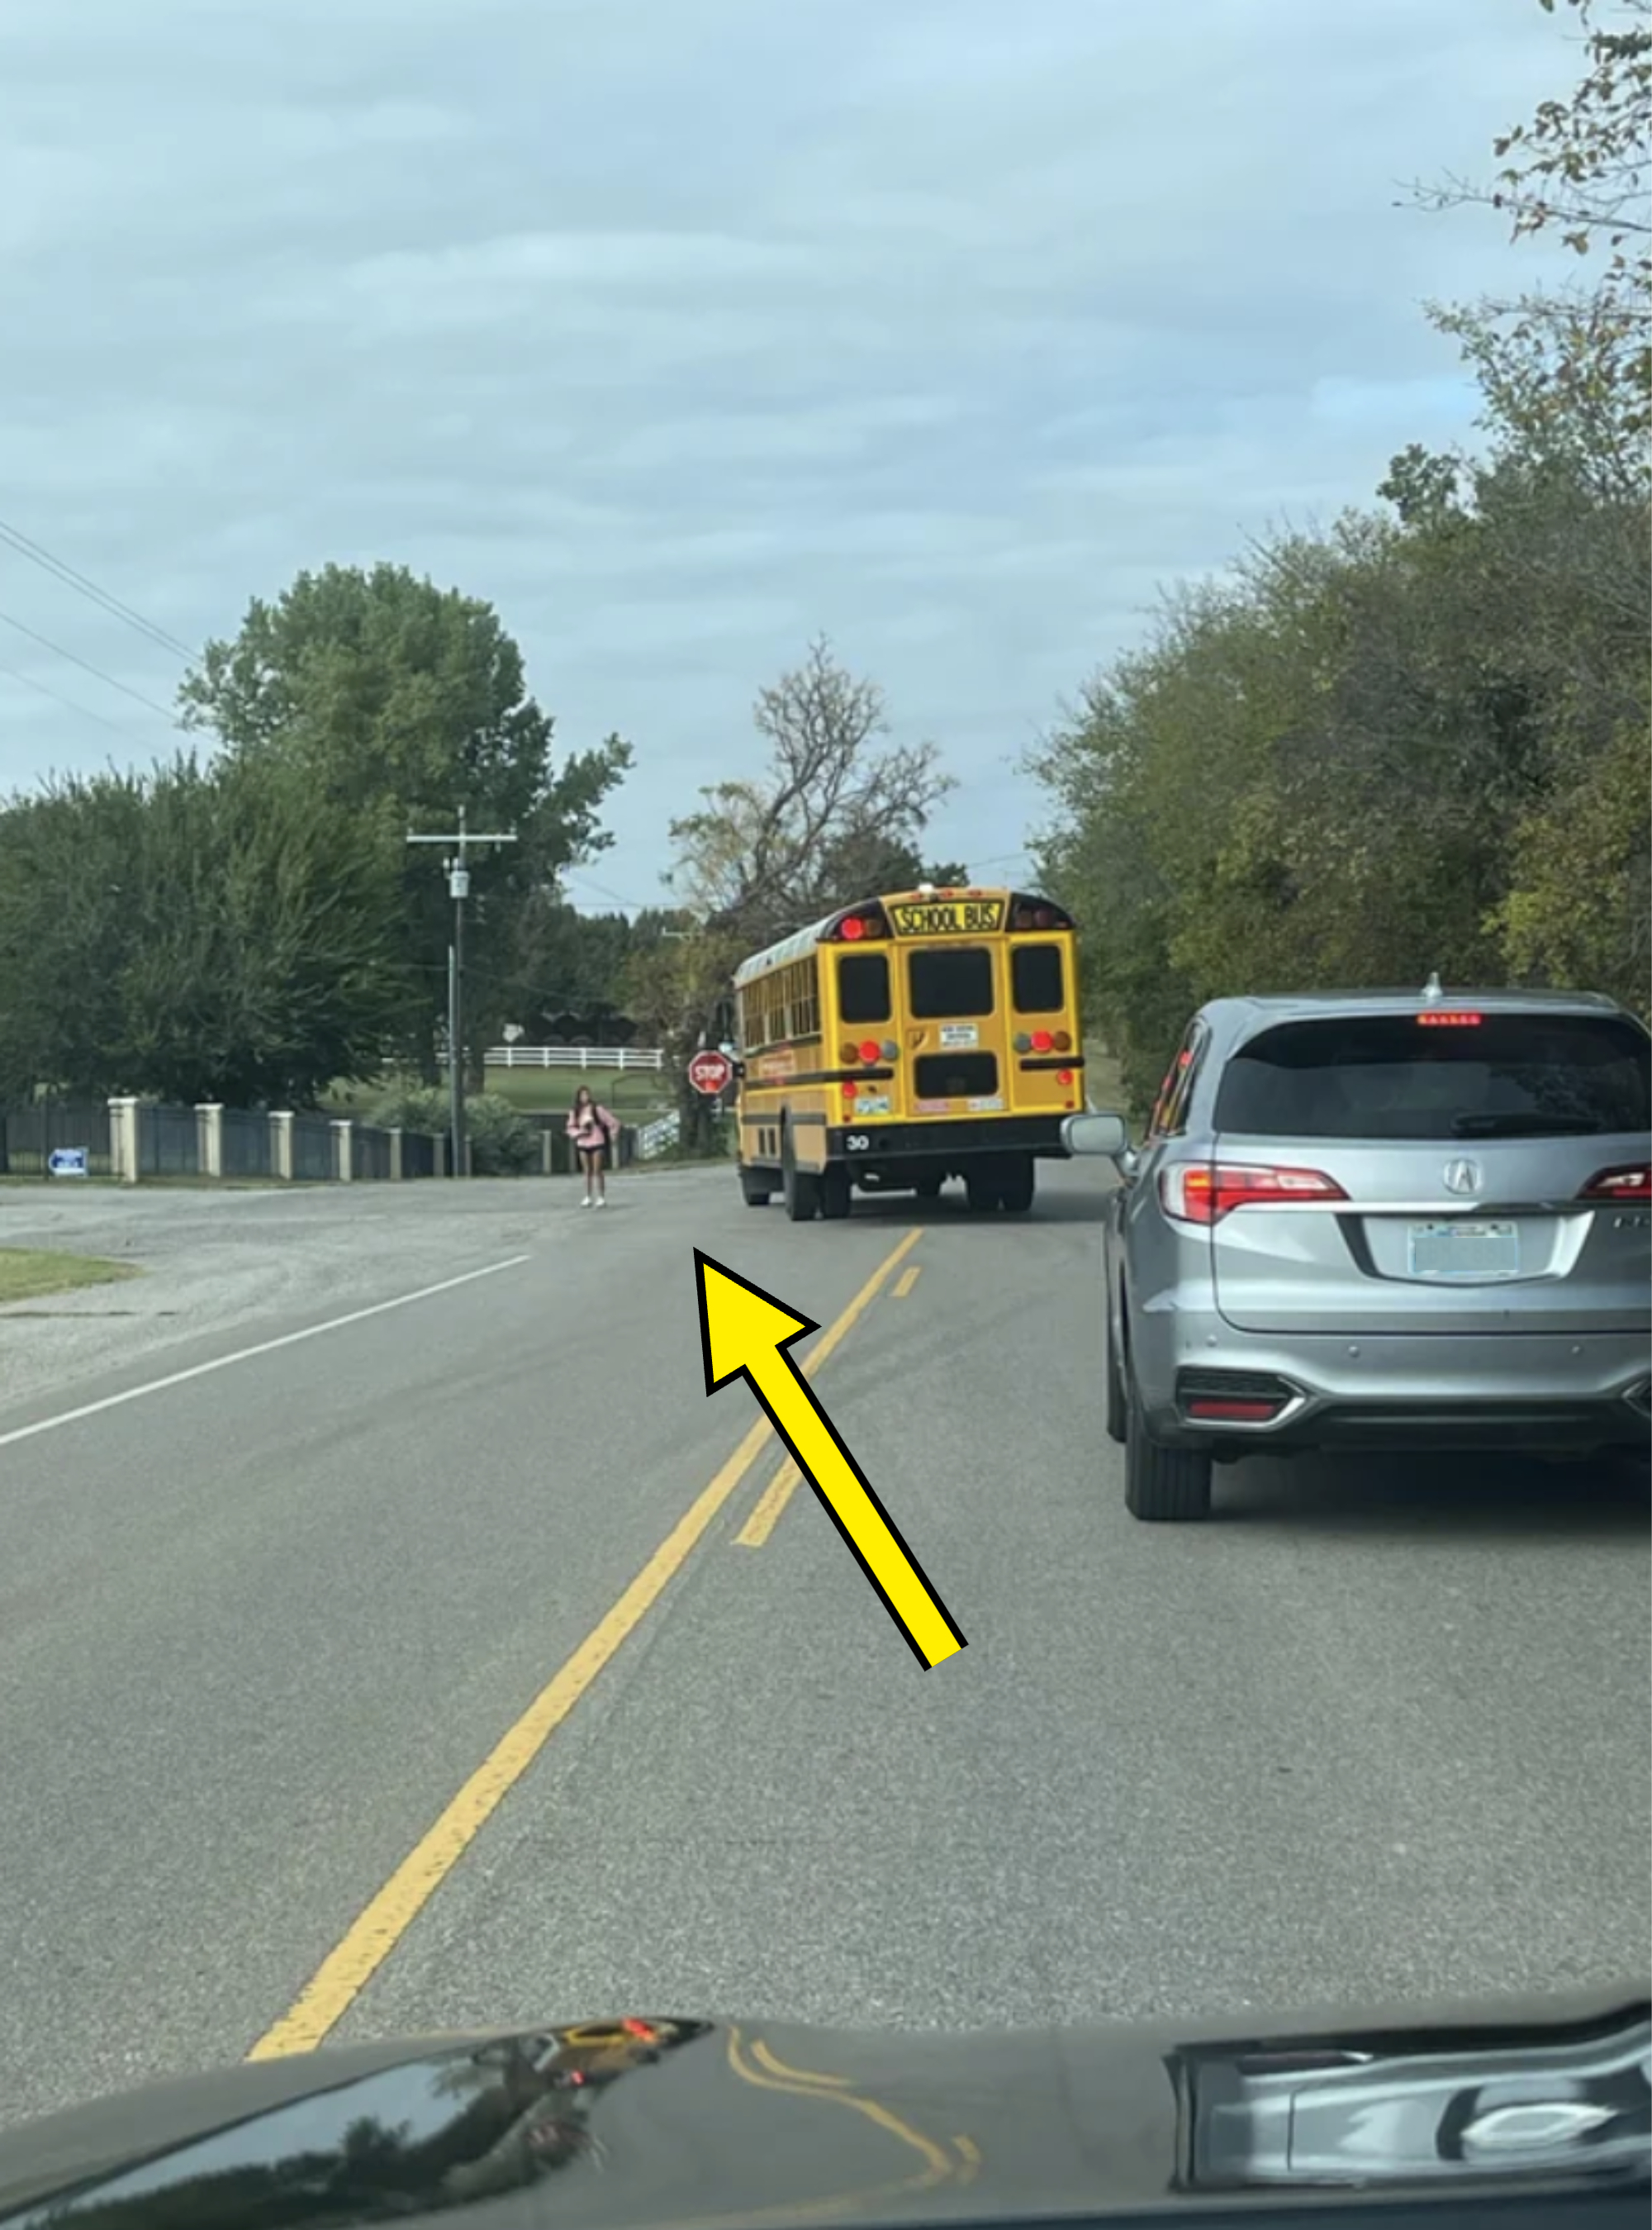 A bus pulled in the middle of the road to block traffic for kids that have to cross the street